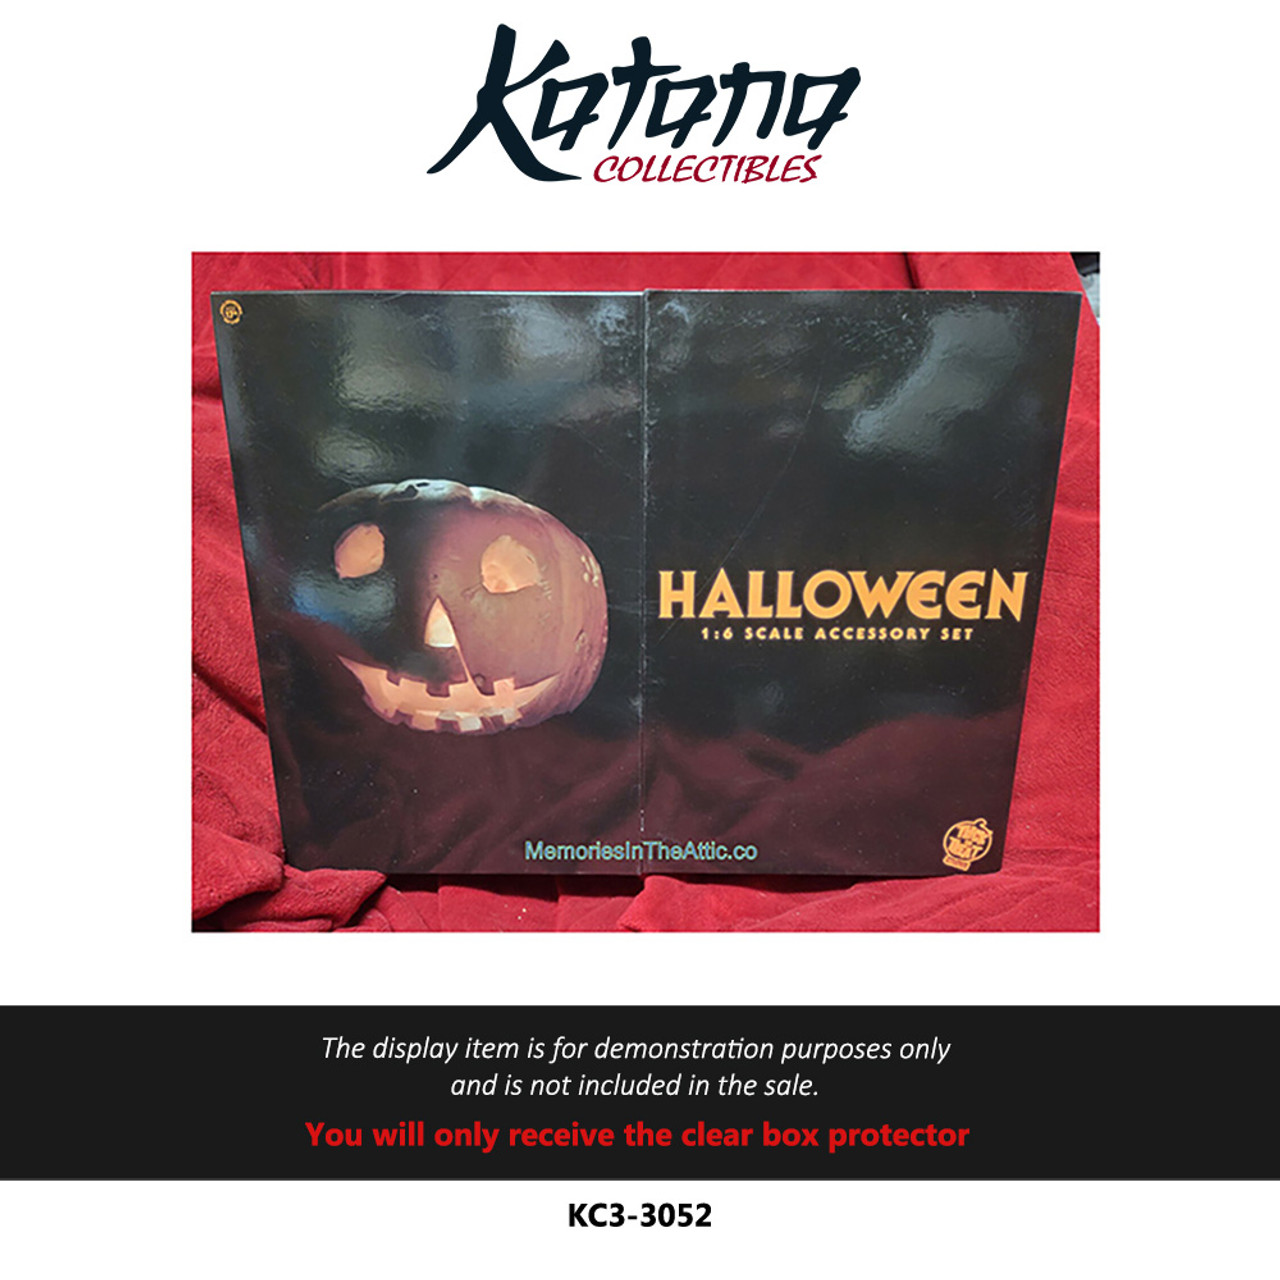 Katana Collectibles Protector For Trick Or Treat Studios Halloween 1:6 Scale Accessory Set